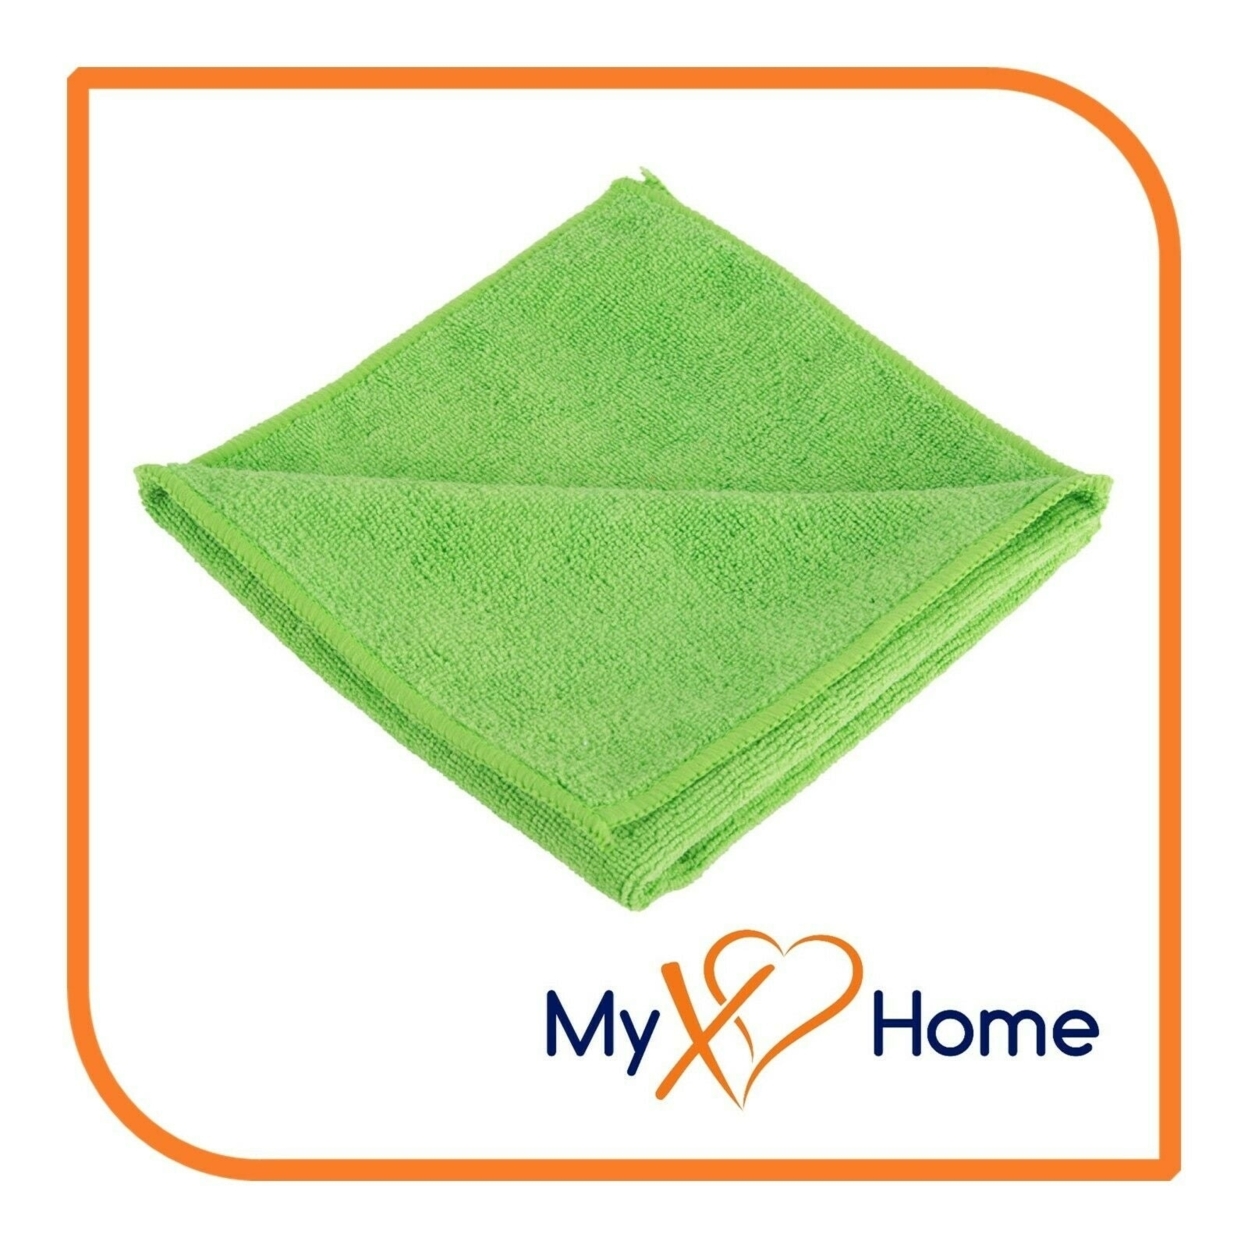 12 x 12 Green Microfiber Towel by MyXOHome - h) 48 Towels, XOH-CLE-TOW-MIC-1245x48